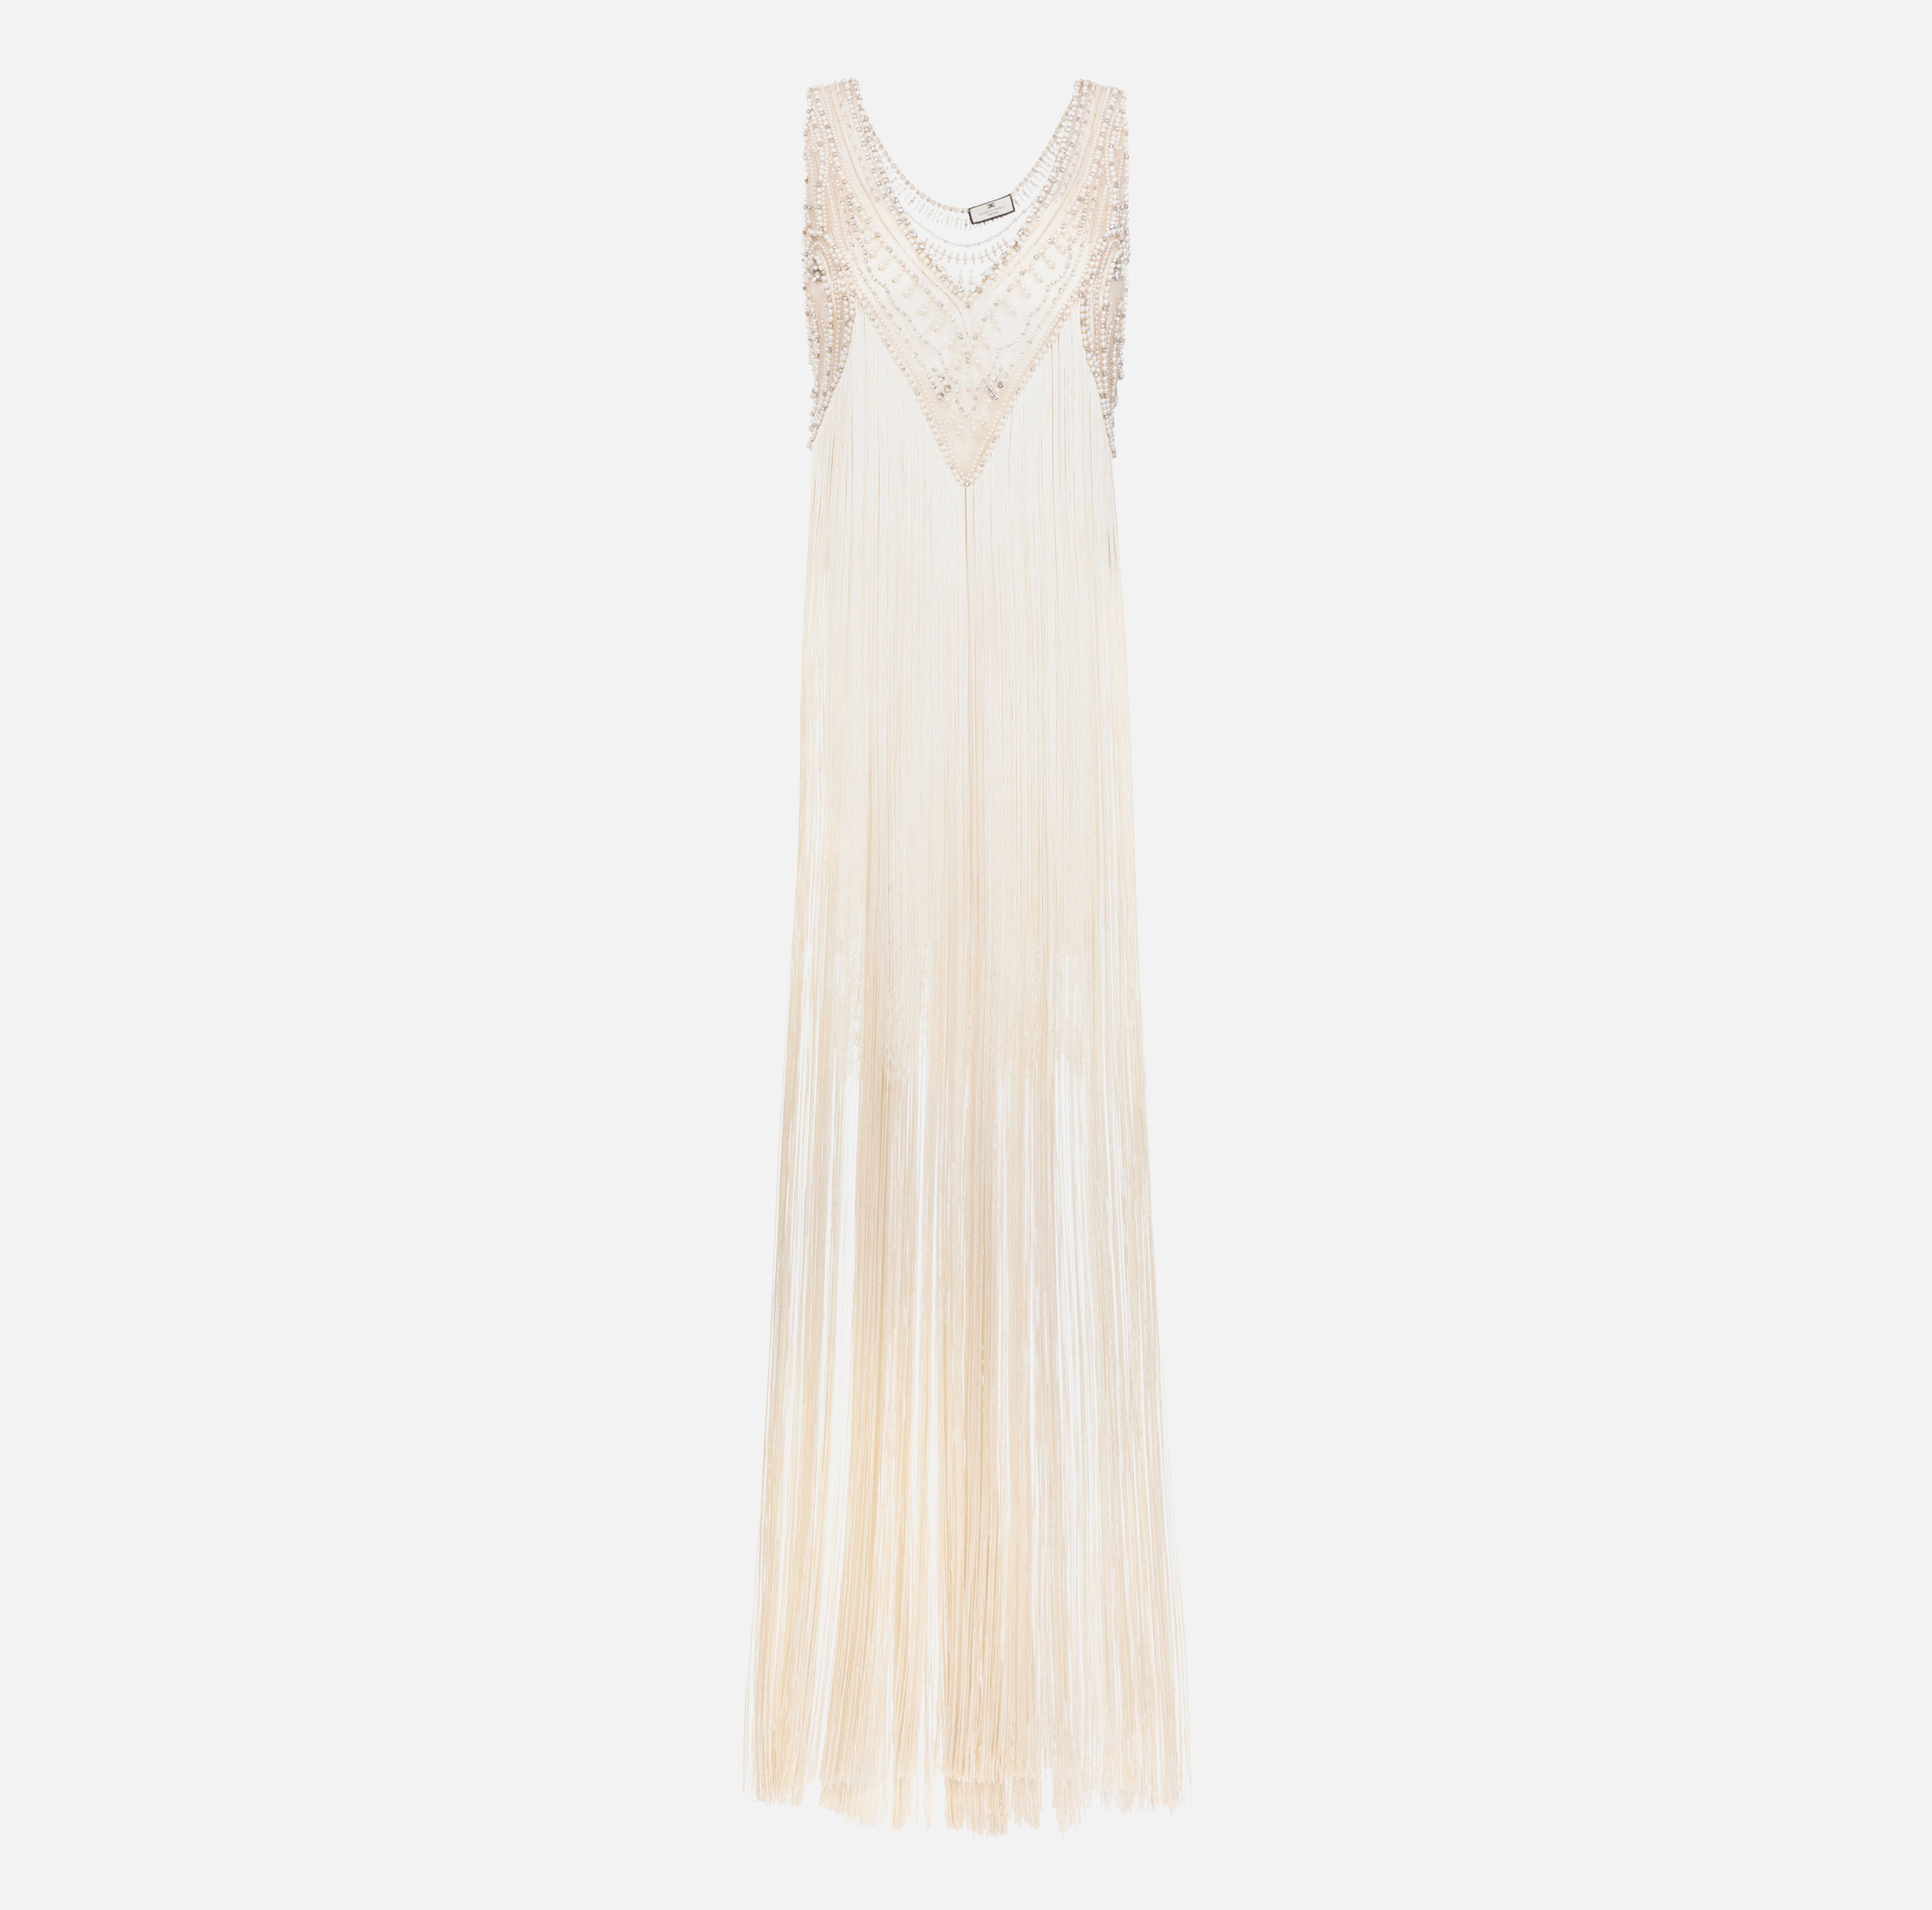 Tulle Red Carpet dress with fringes and beads - ABBIGLIAMENTO - Elisabetta Franchi